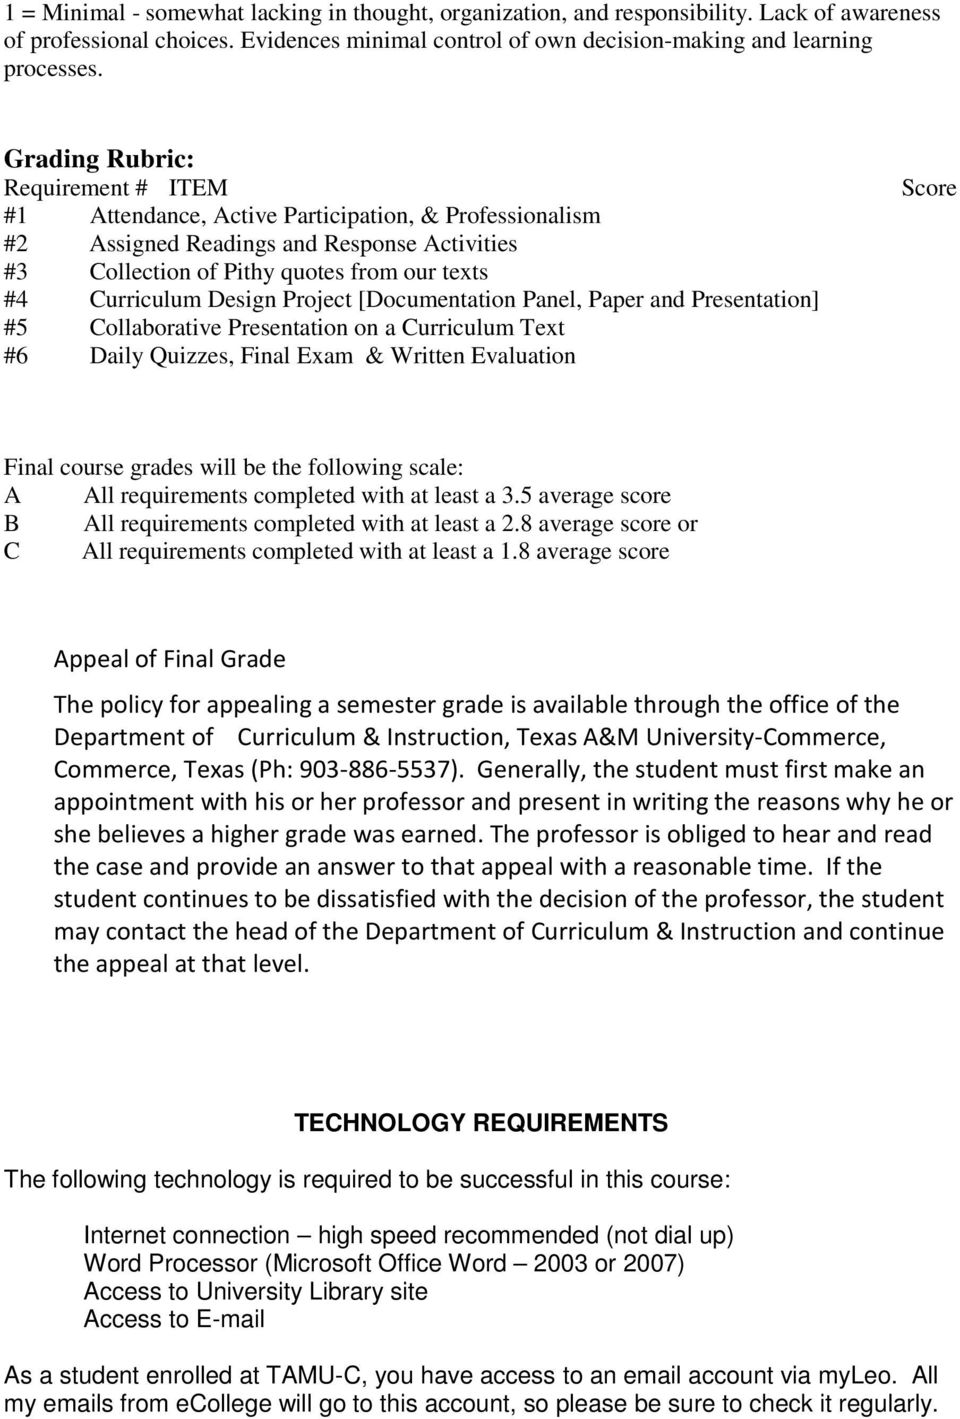 Design Project [Documentation Panel, Paper and Presentation] #5 Collaborative Presentation on a Curriculum Text #6 Daily Quizzes, Final Exam & Written Evaluation Score Final course grades will be the